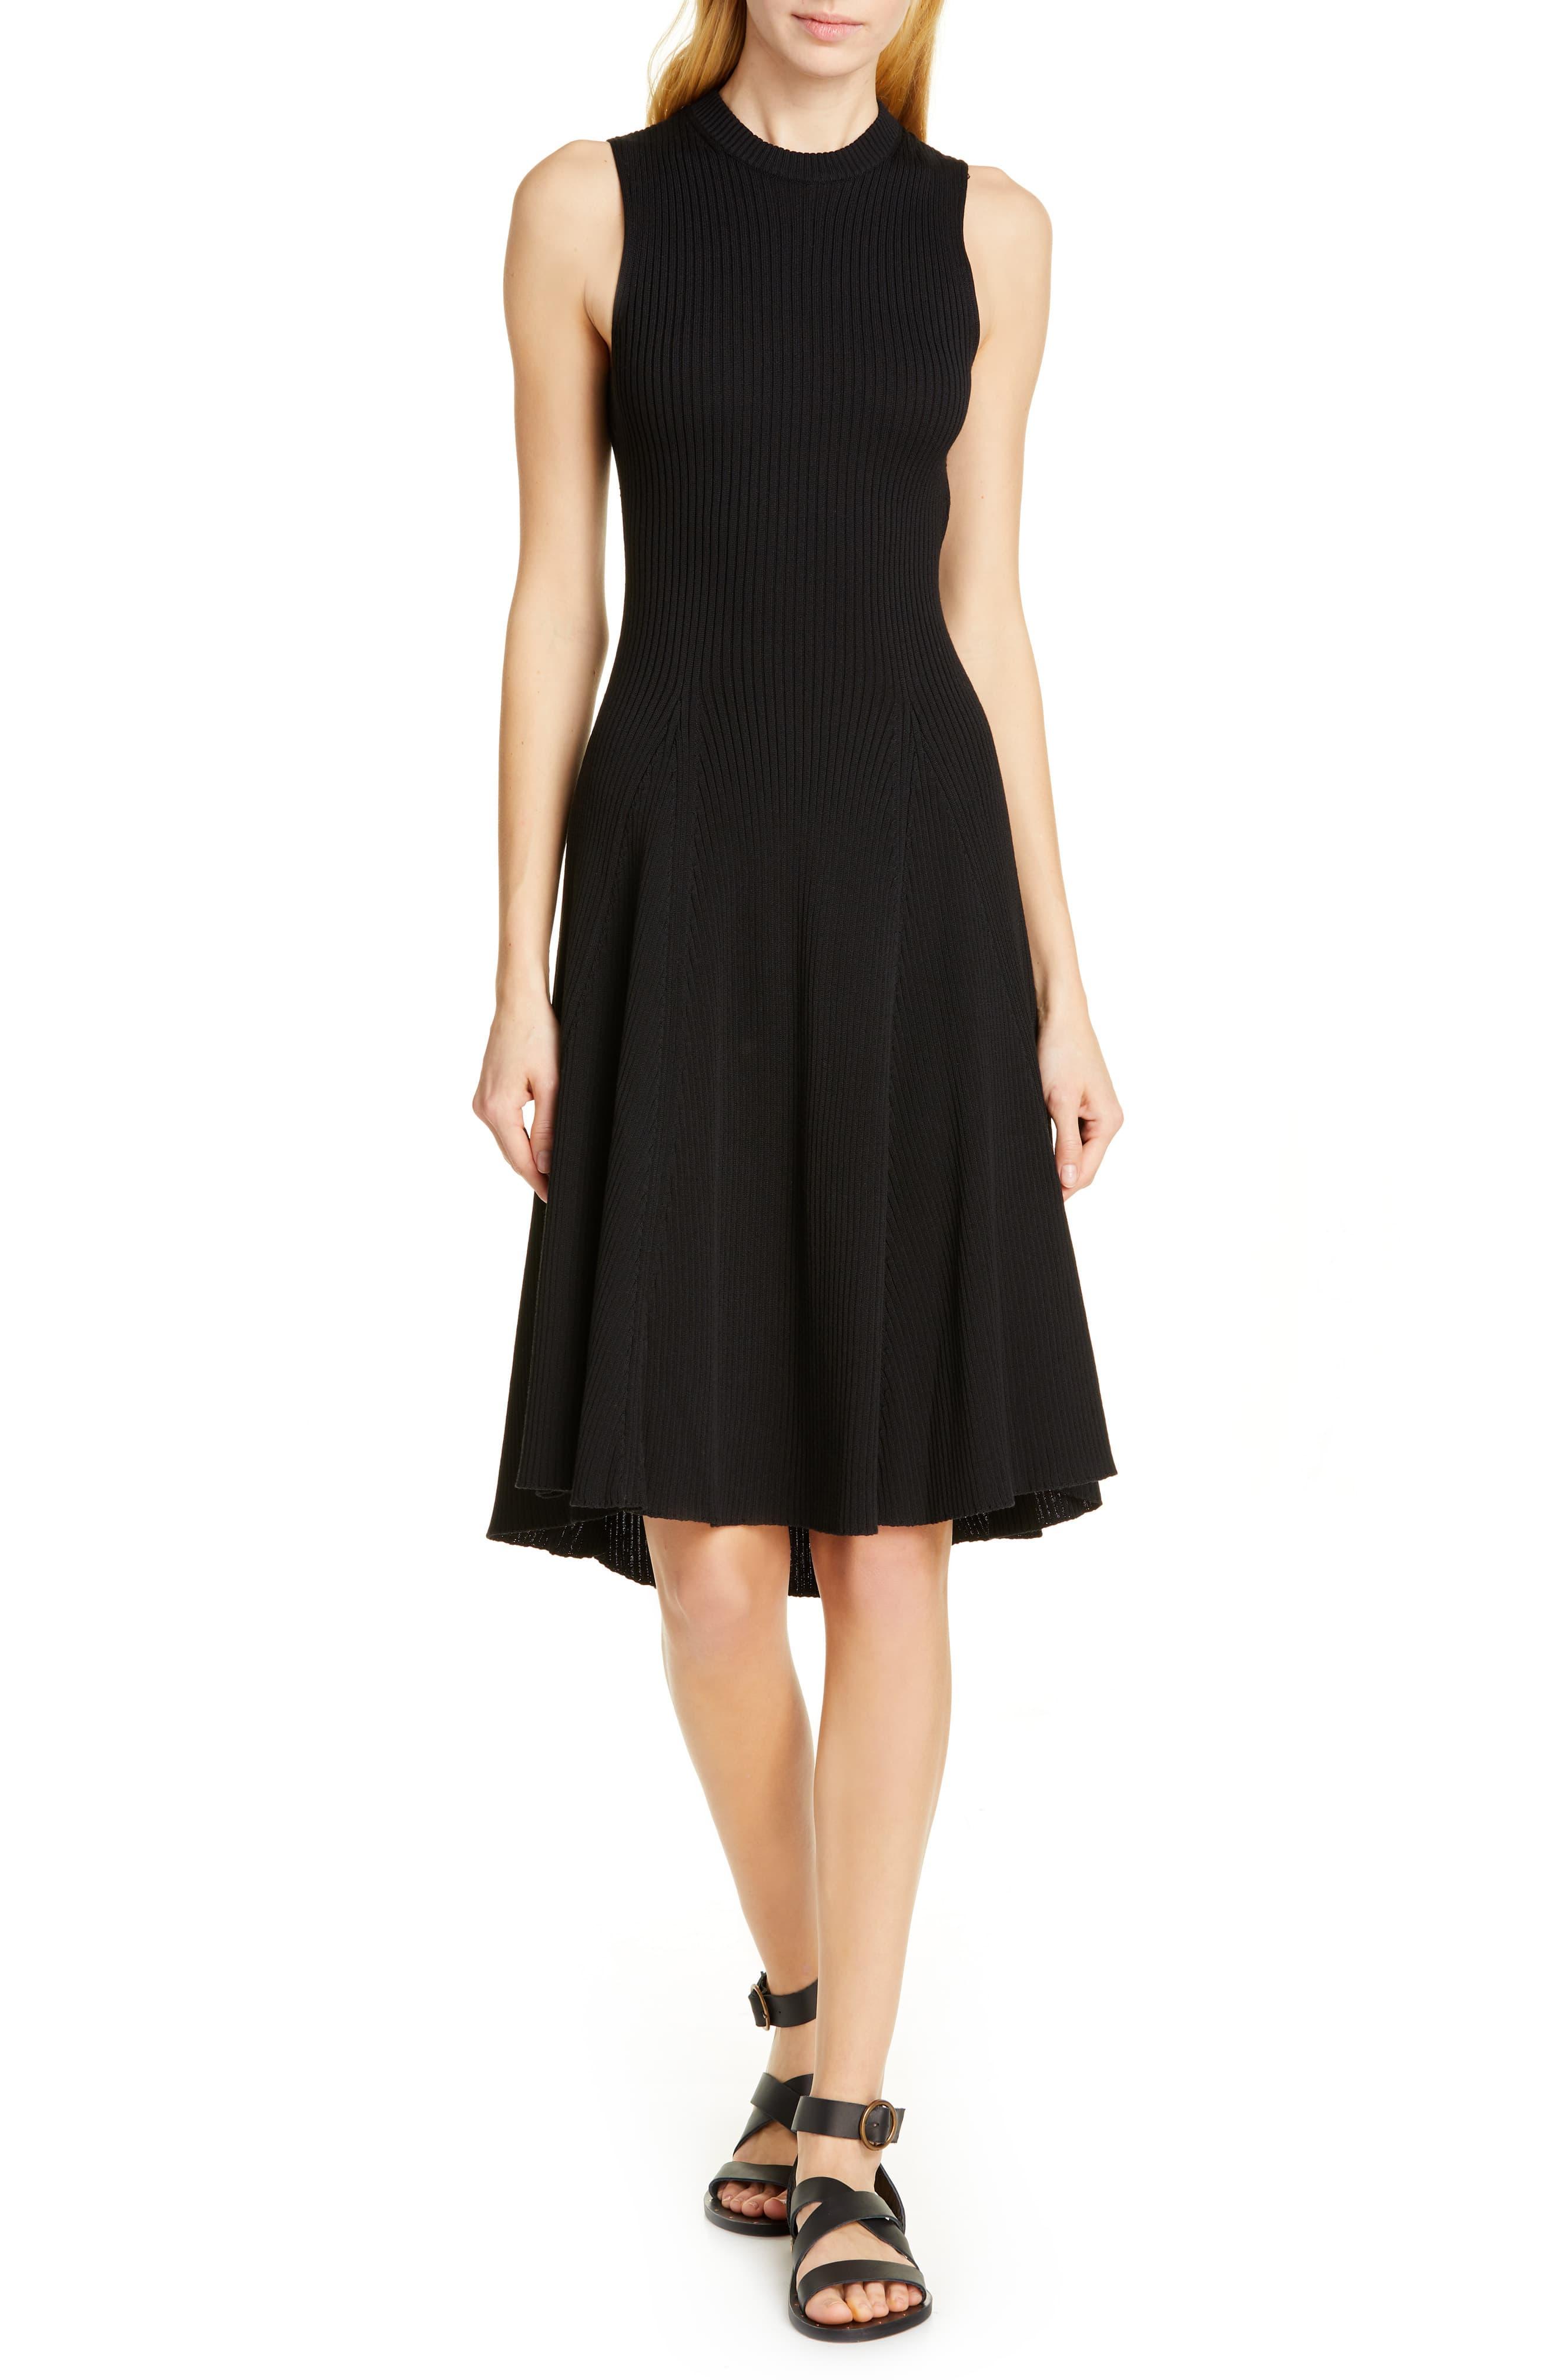 Polo Ralph Lauren Ribbed Knit Dress in Black - Lyst